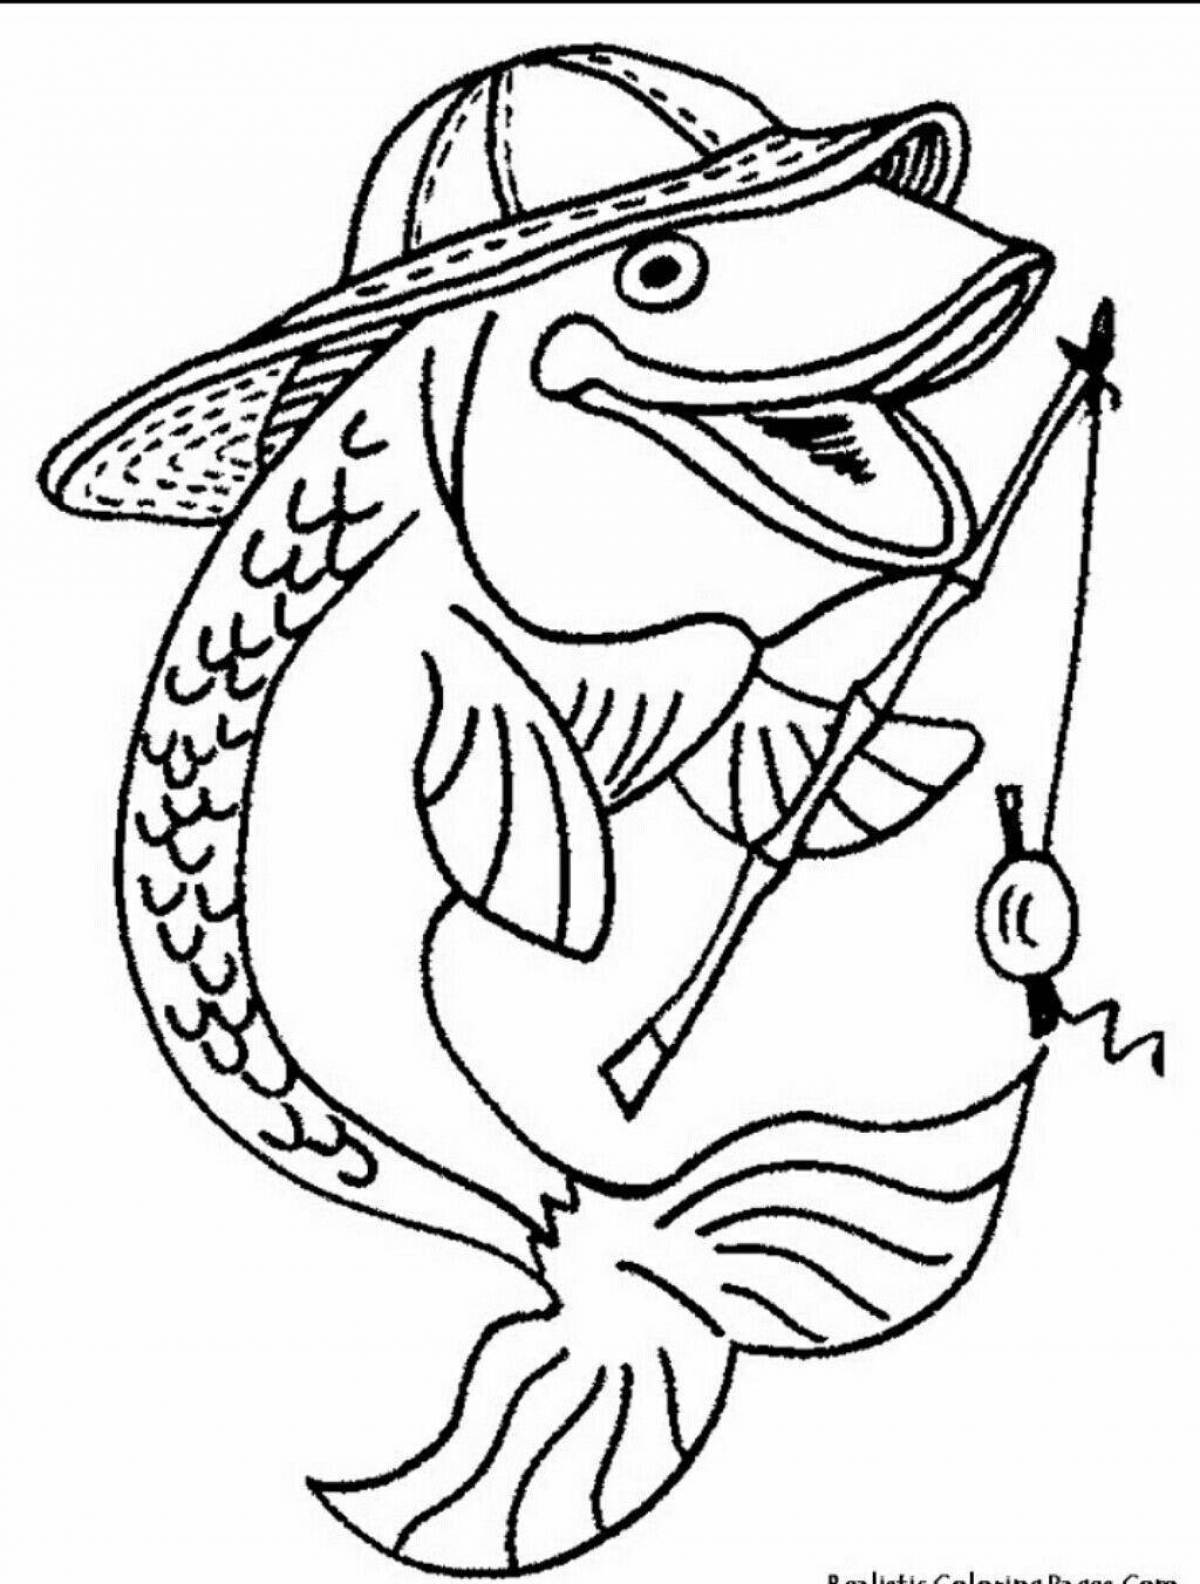 Adorable fisherman coloring page for kids